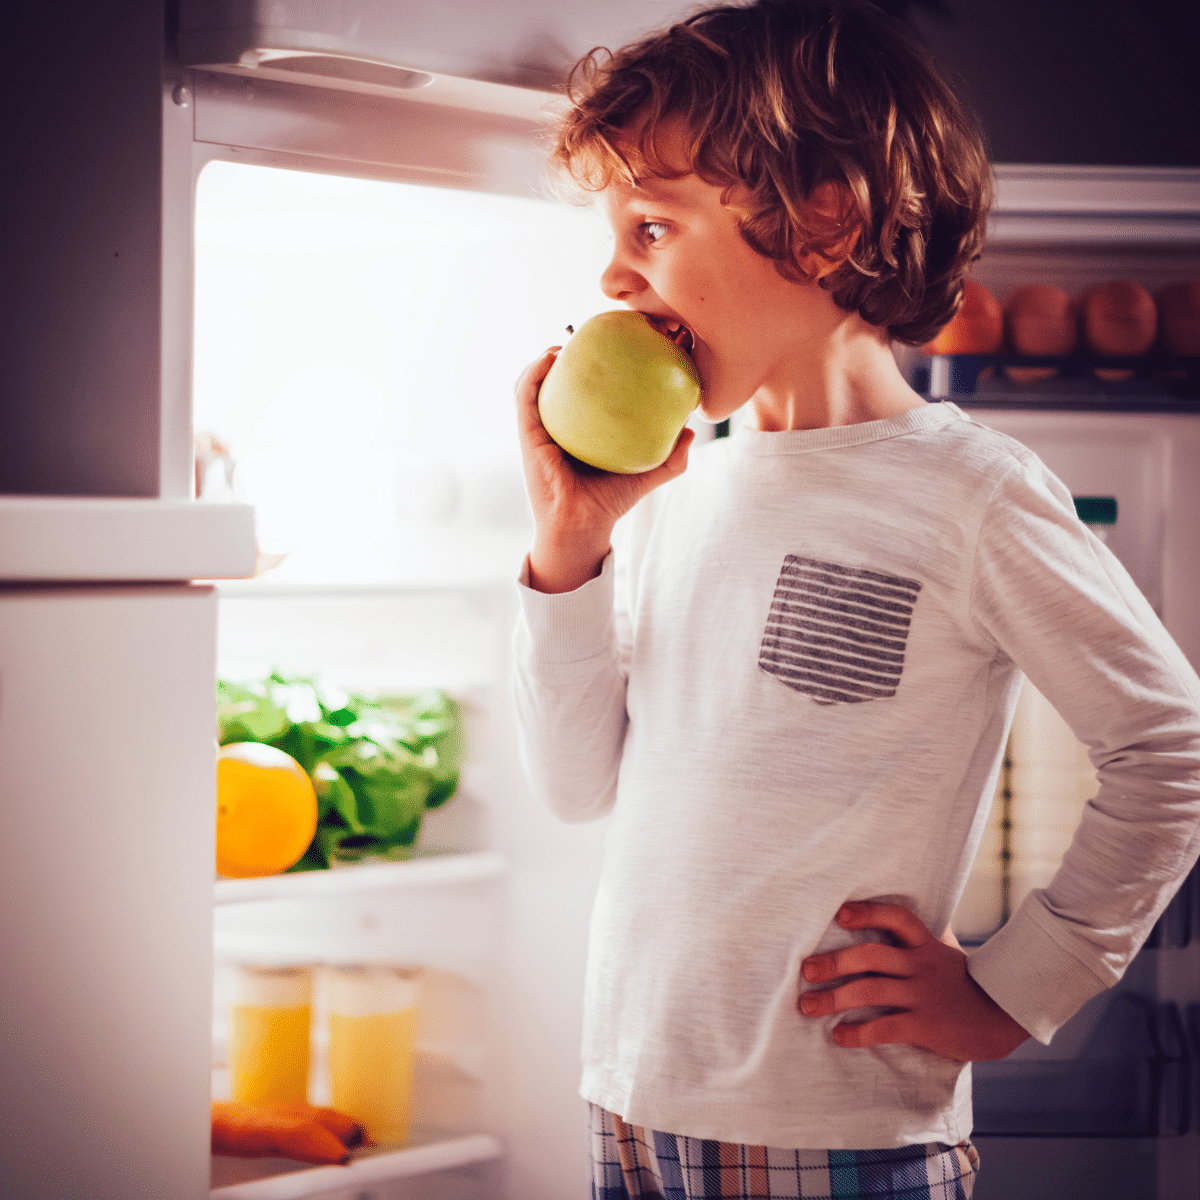 Child in pajamas eating a bedtime snack while standing in front of the refrigerator